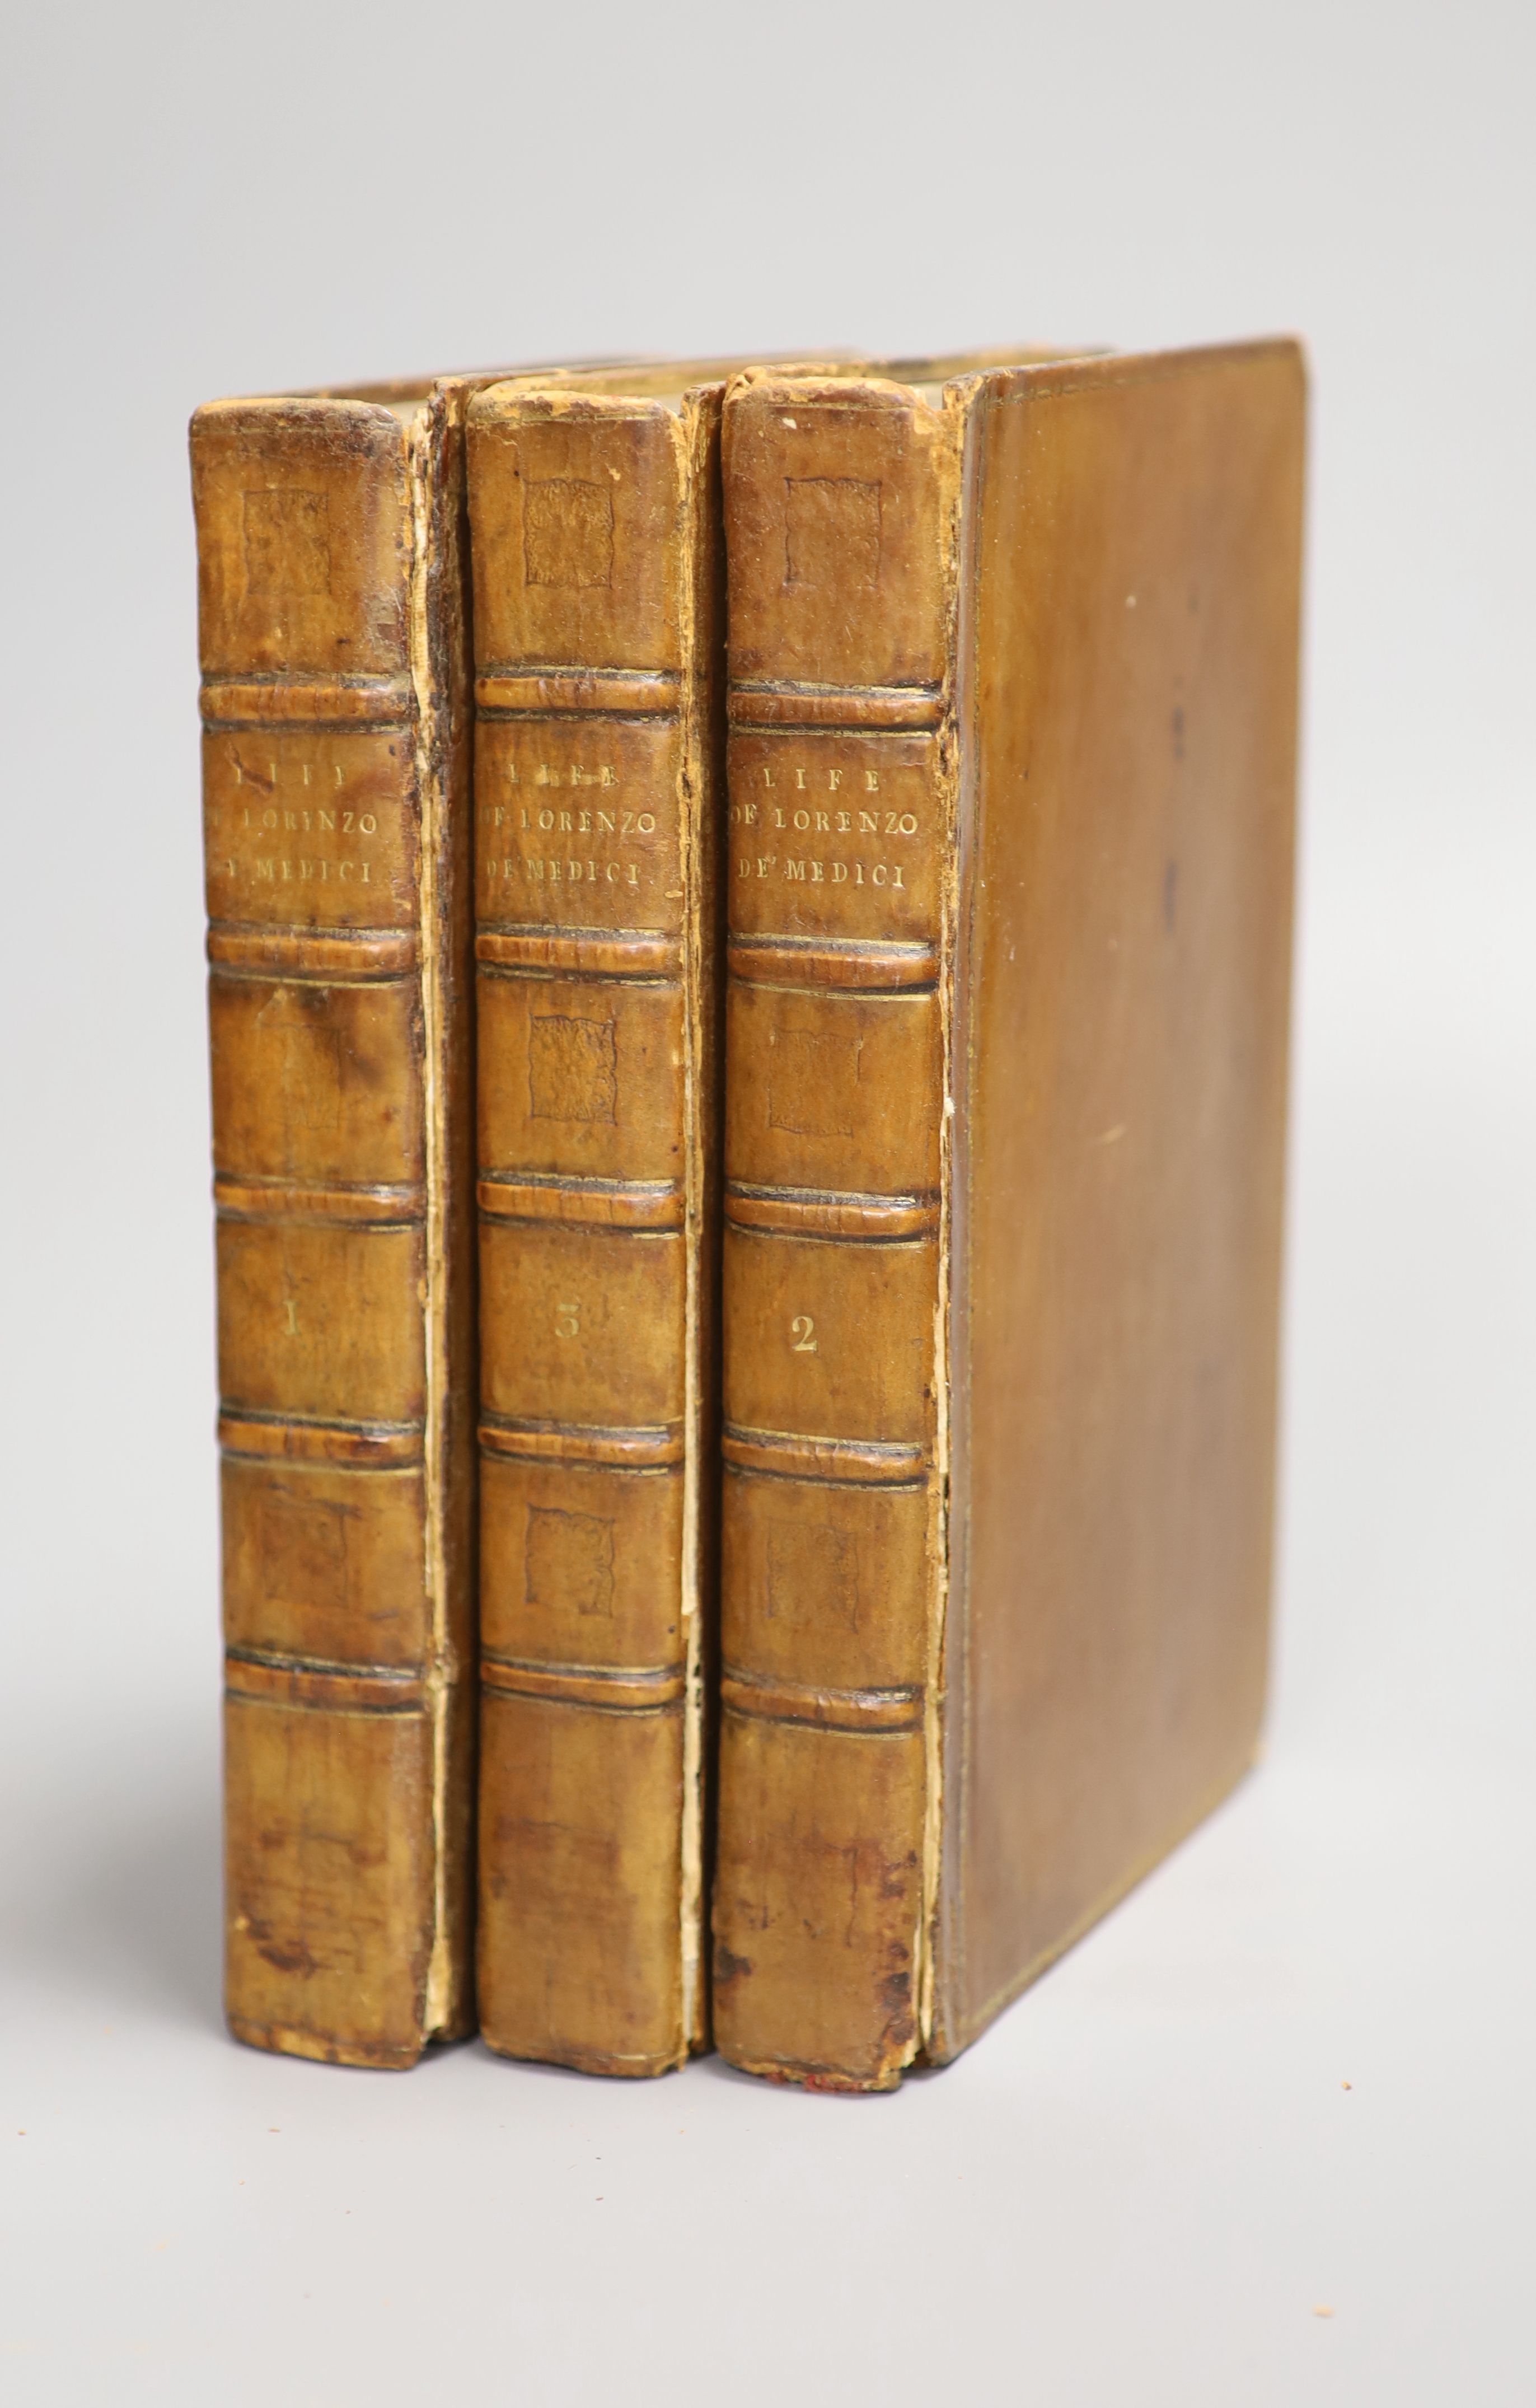 Roscoe, William - The Life of Lorenzo de Medici, 3 vols, 5th edition, 8vo, calf, with engraved portrait, some joints splitting, several pages stained, T. Cadell and W. Davies, London, 1806